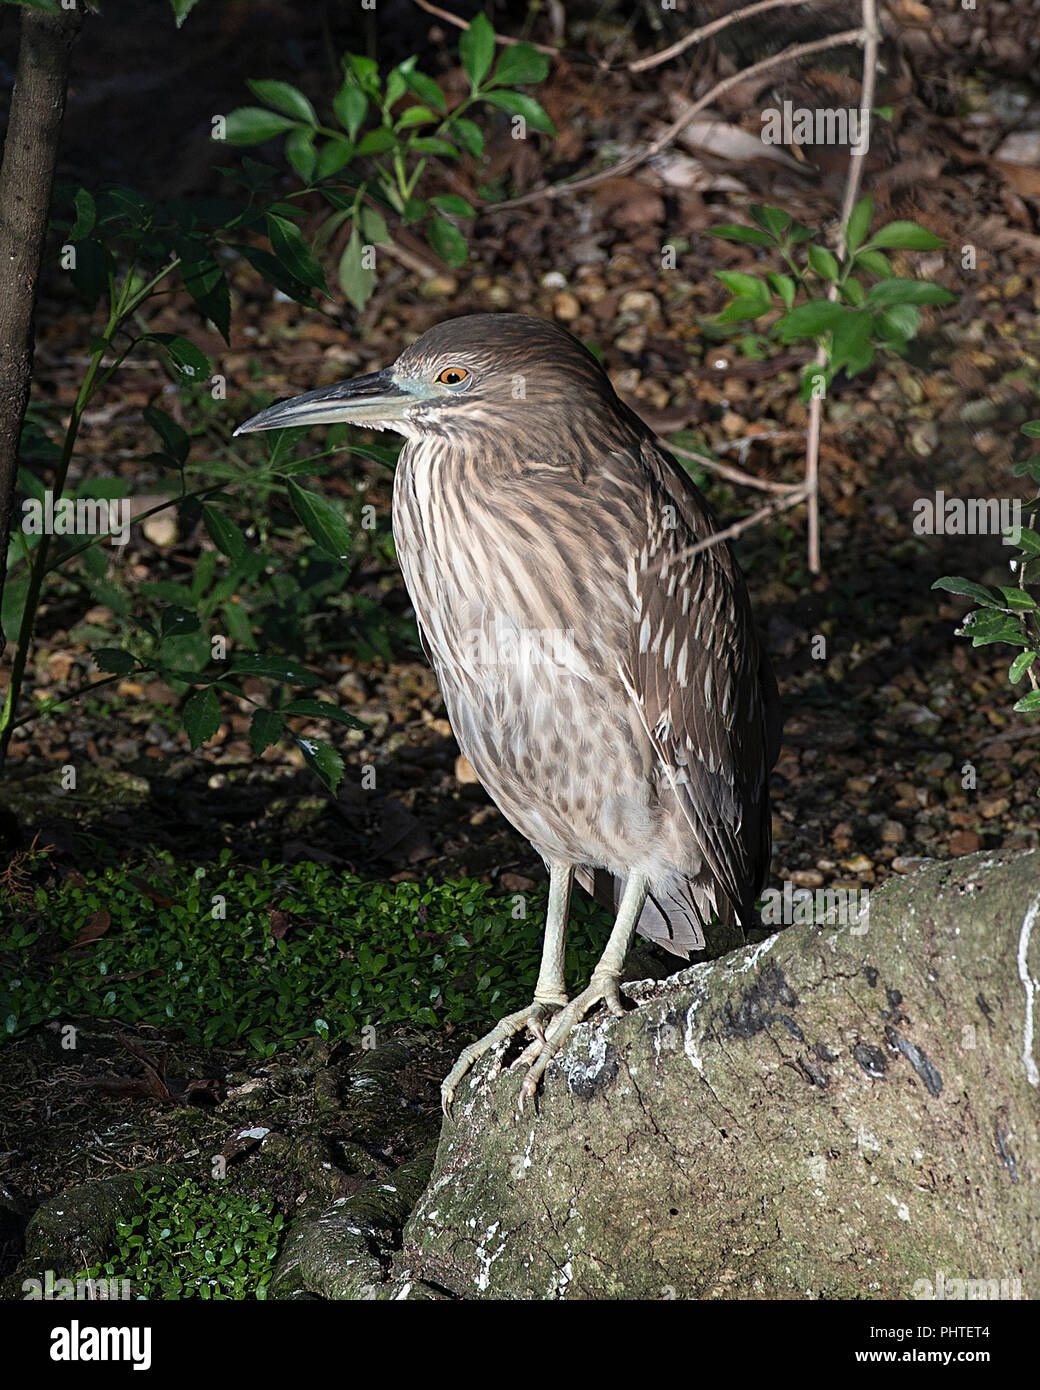 Inmature Black-Crowned Night-Heron uccello nel suo ambiente. Foto Stock